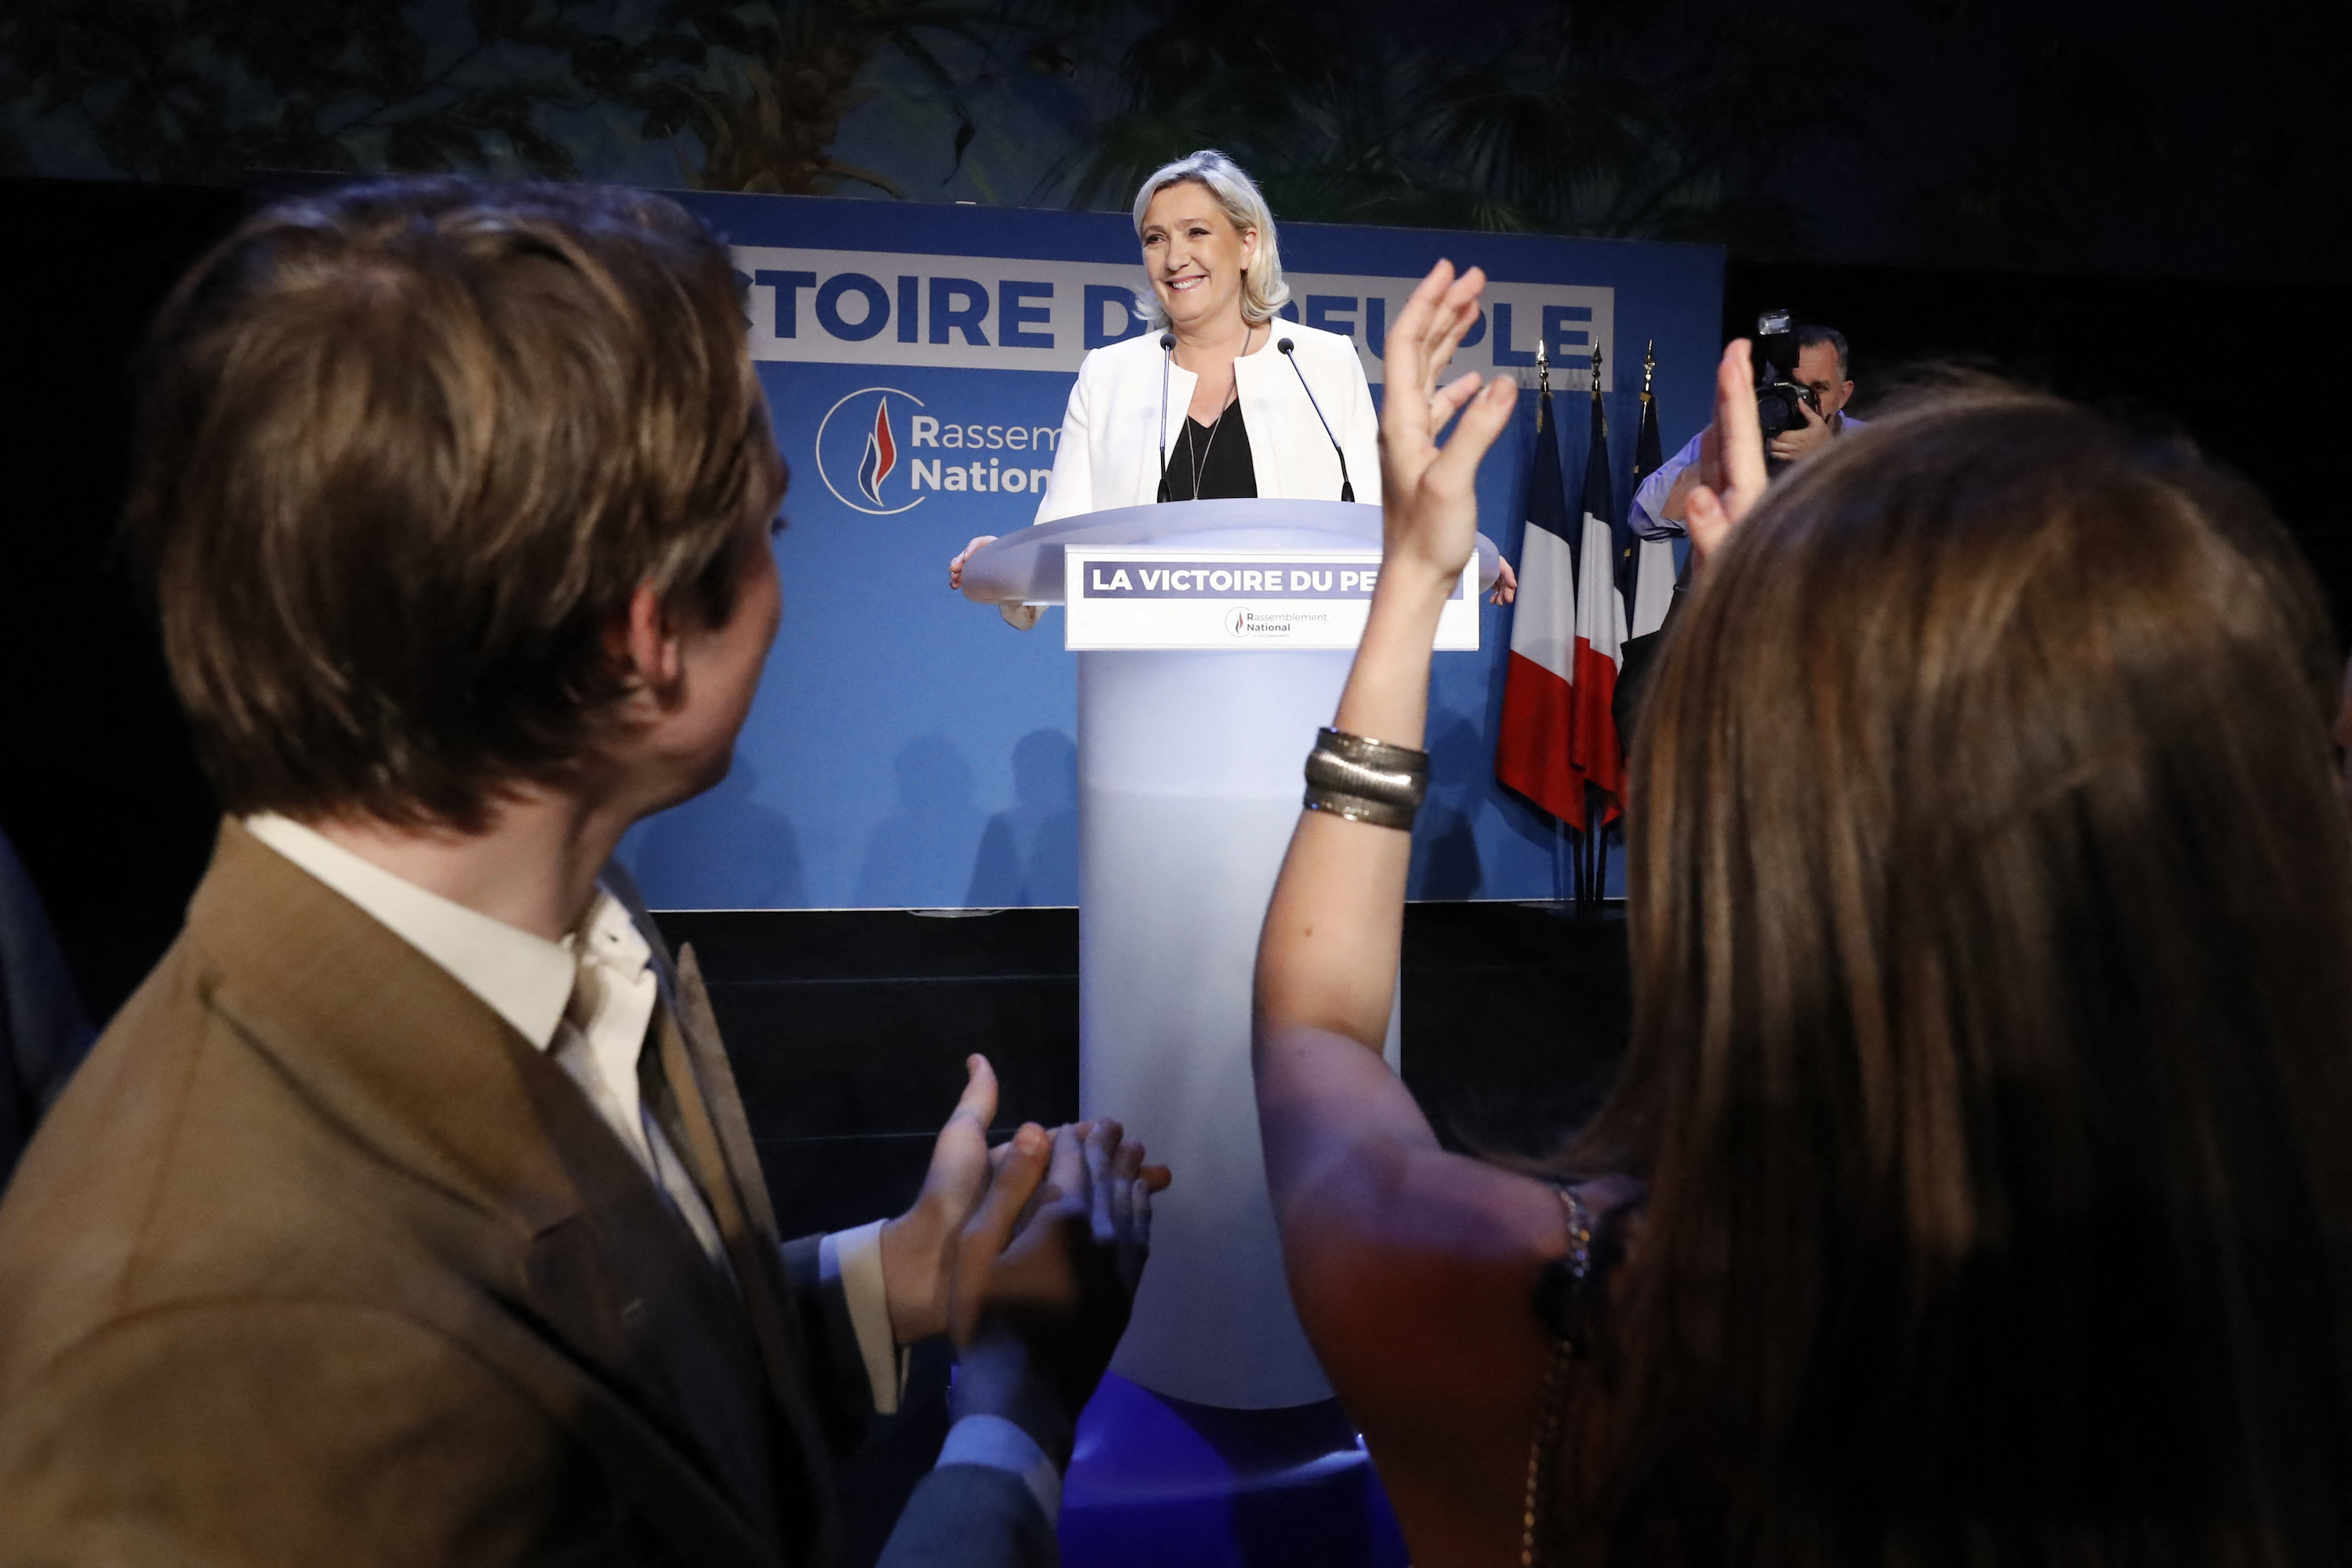 Marine Le Pen's Populist Image Is an Iron Fist in a Velvet Glove